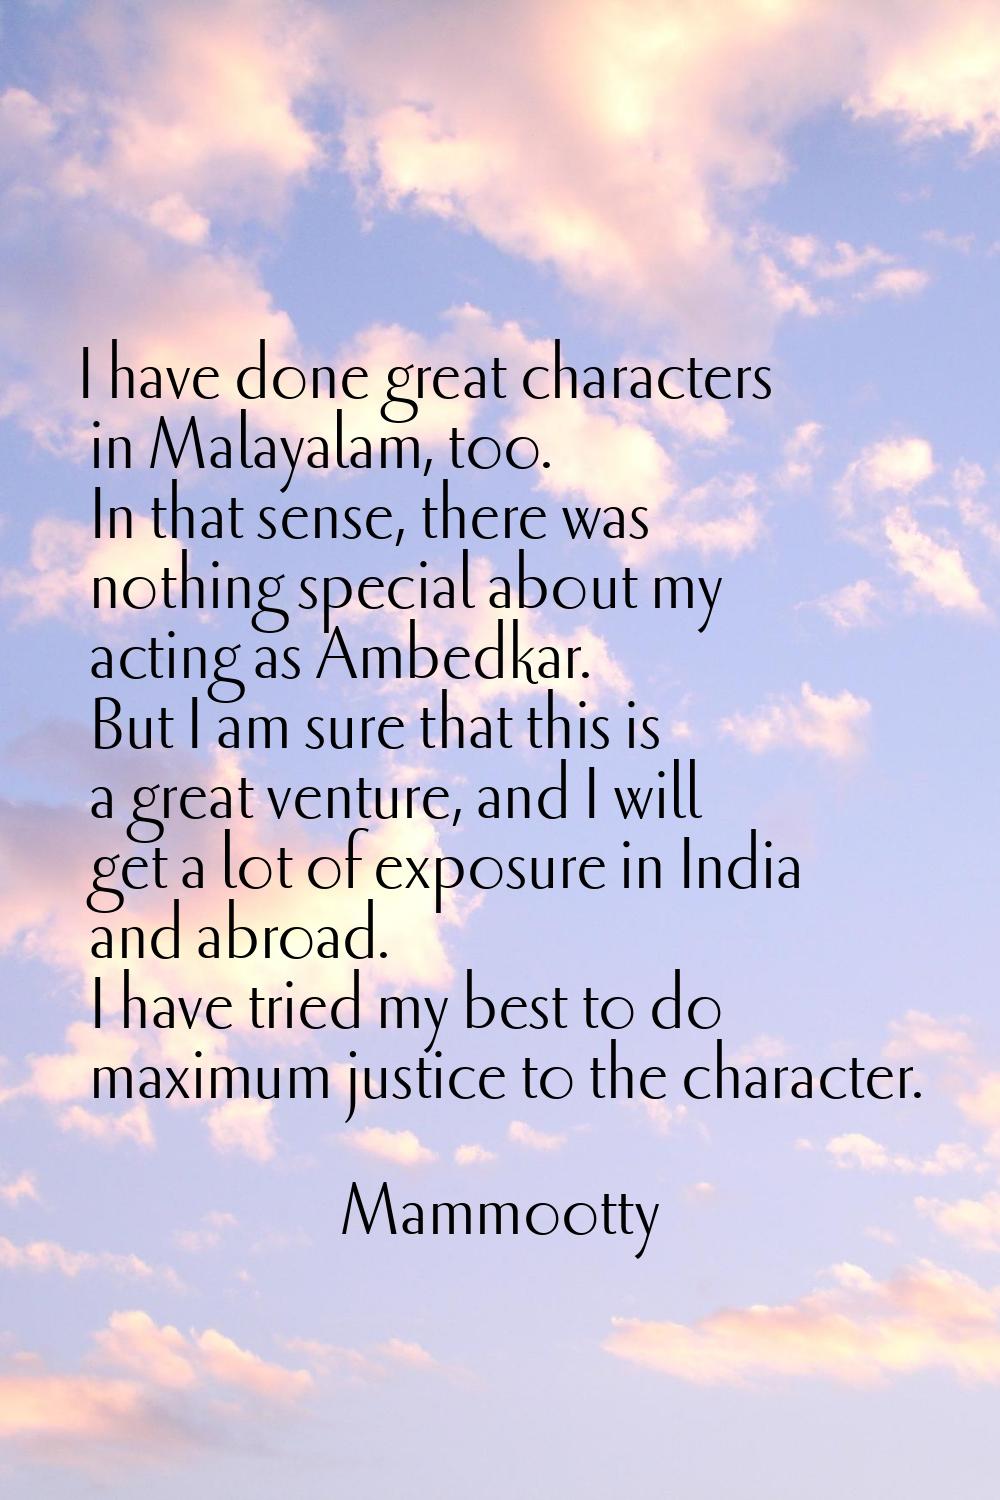 I have done great characters in Malayalam, too. In that sense, there was nothing special about my a